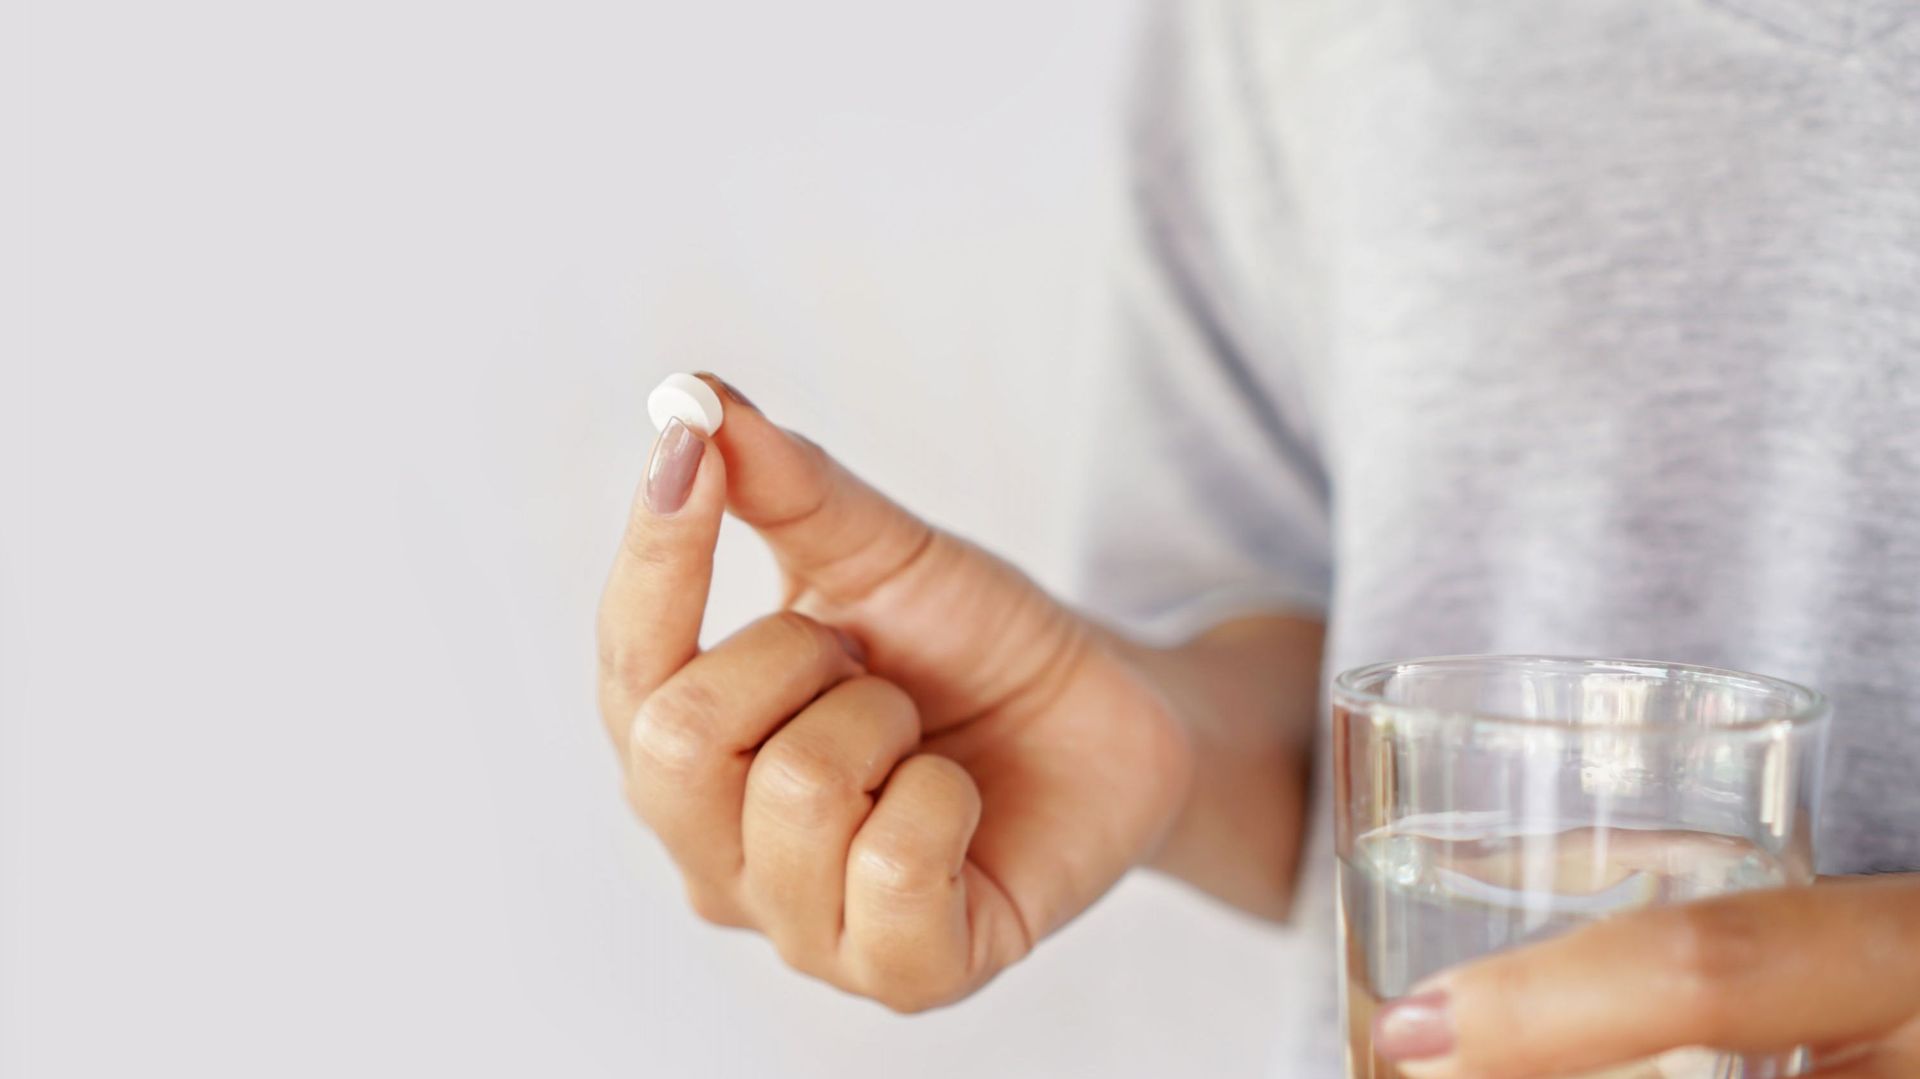 Woman Hand Taking Pill With Glass Of Water, Healthcare And Medical Concept